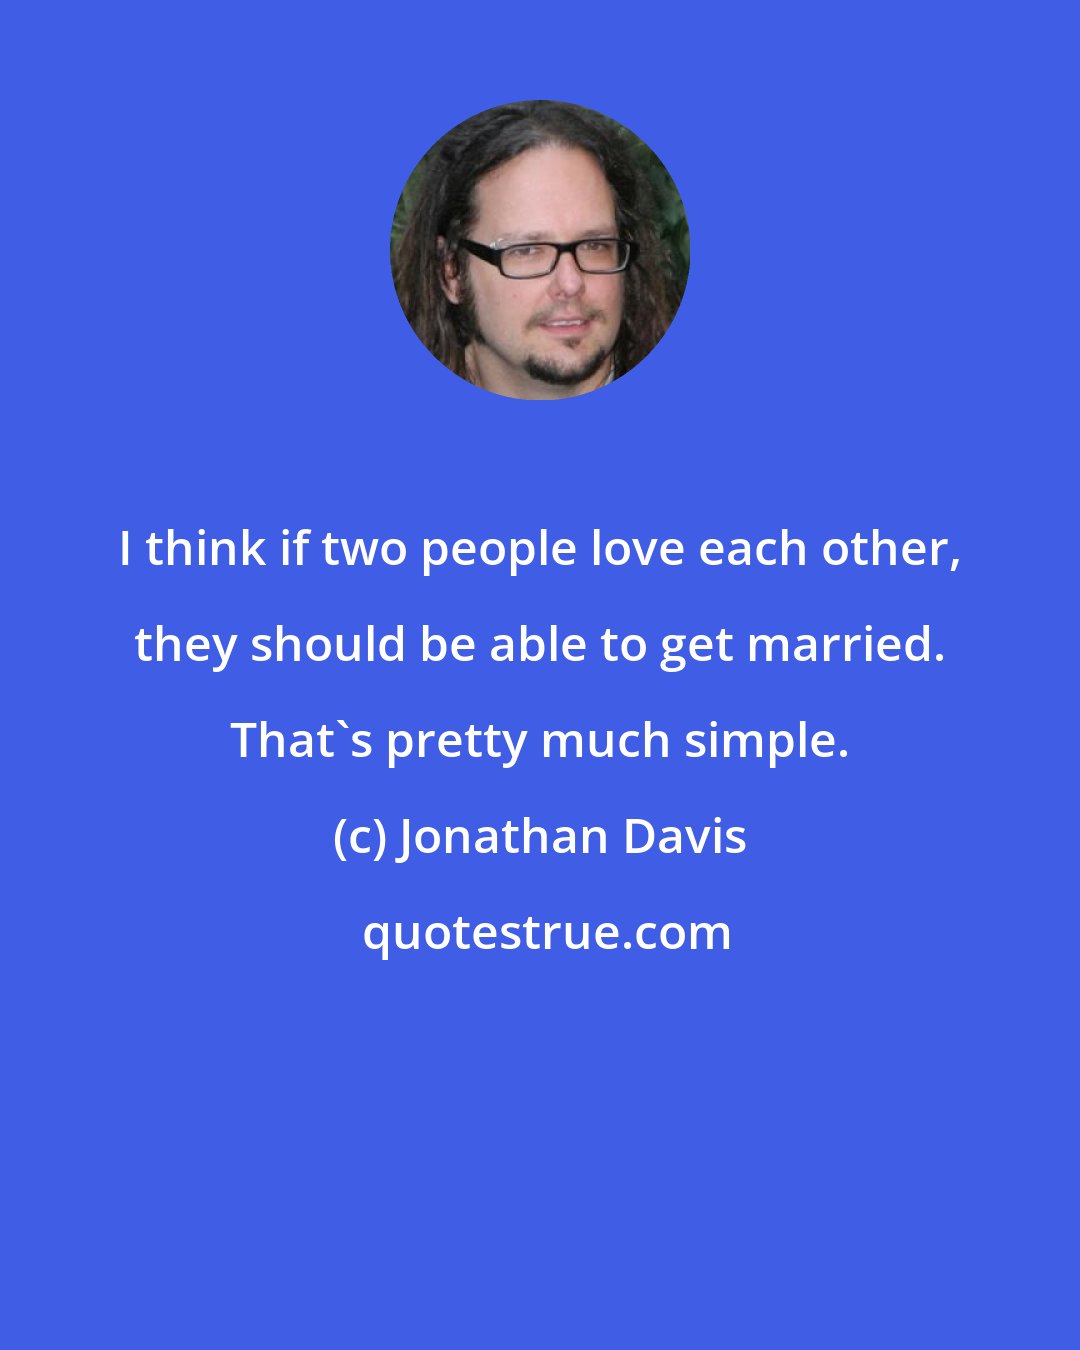 Jonathan Davis: I think if two people love each other, they should be able to get married. That's pretty much simple.